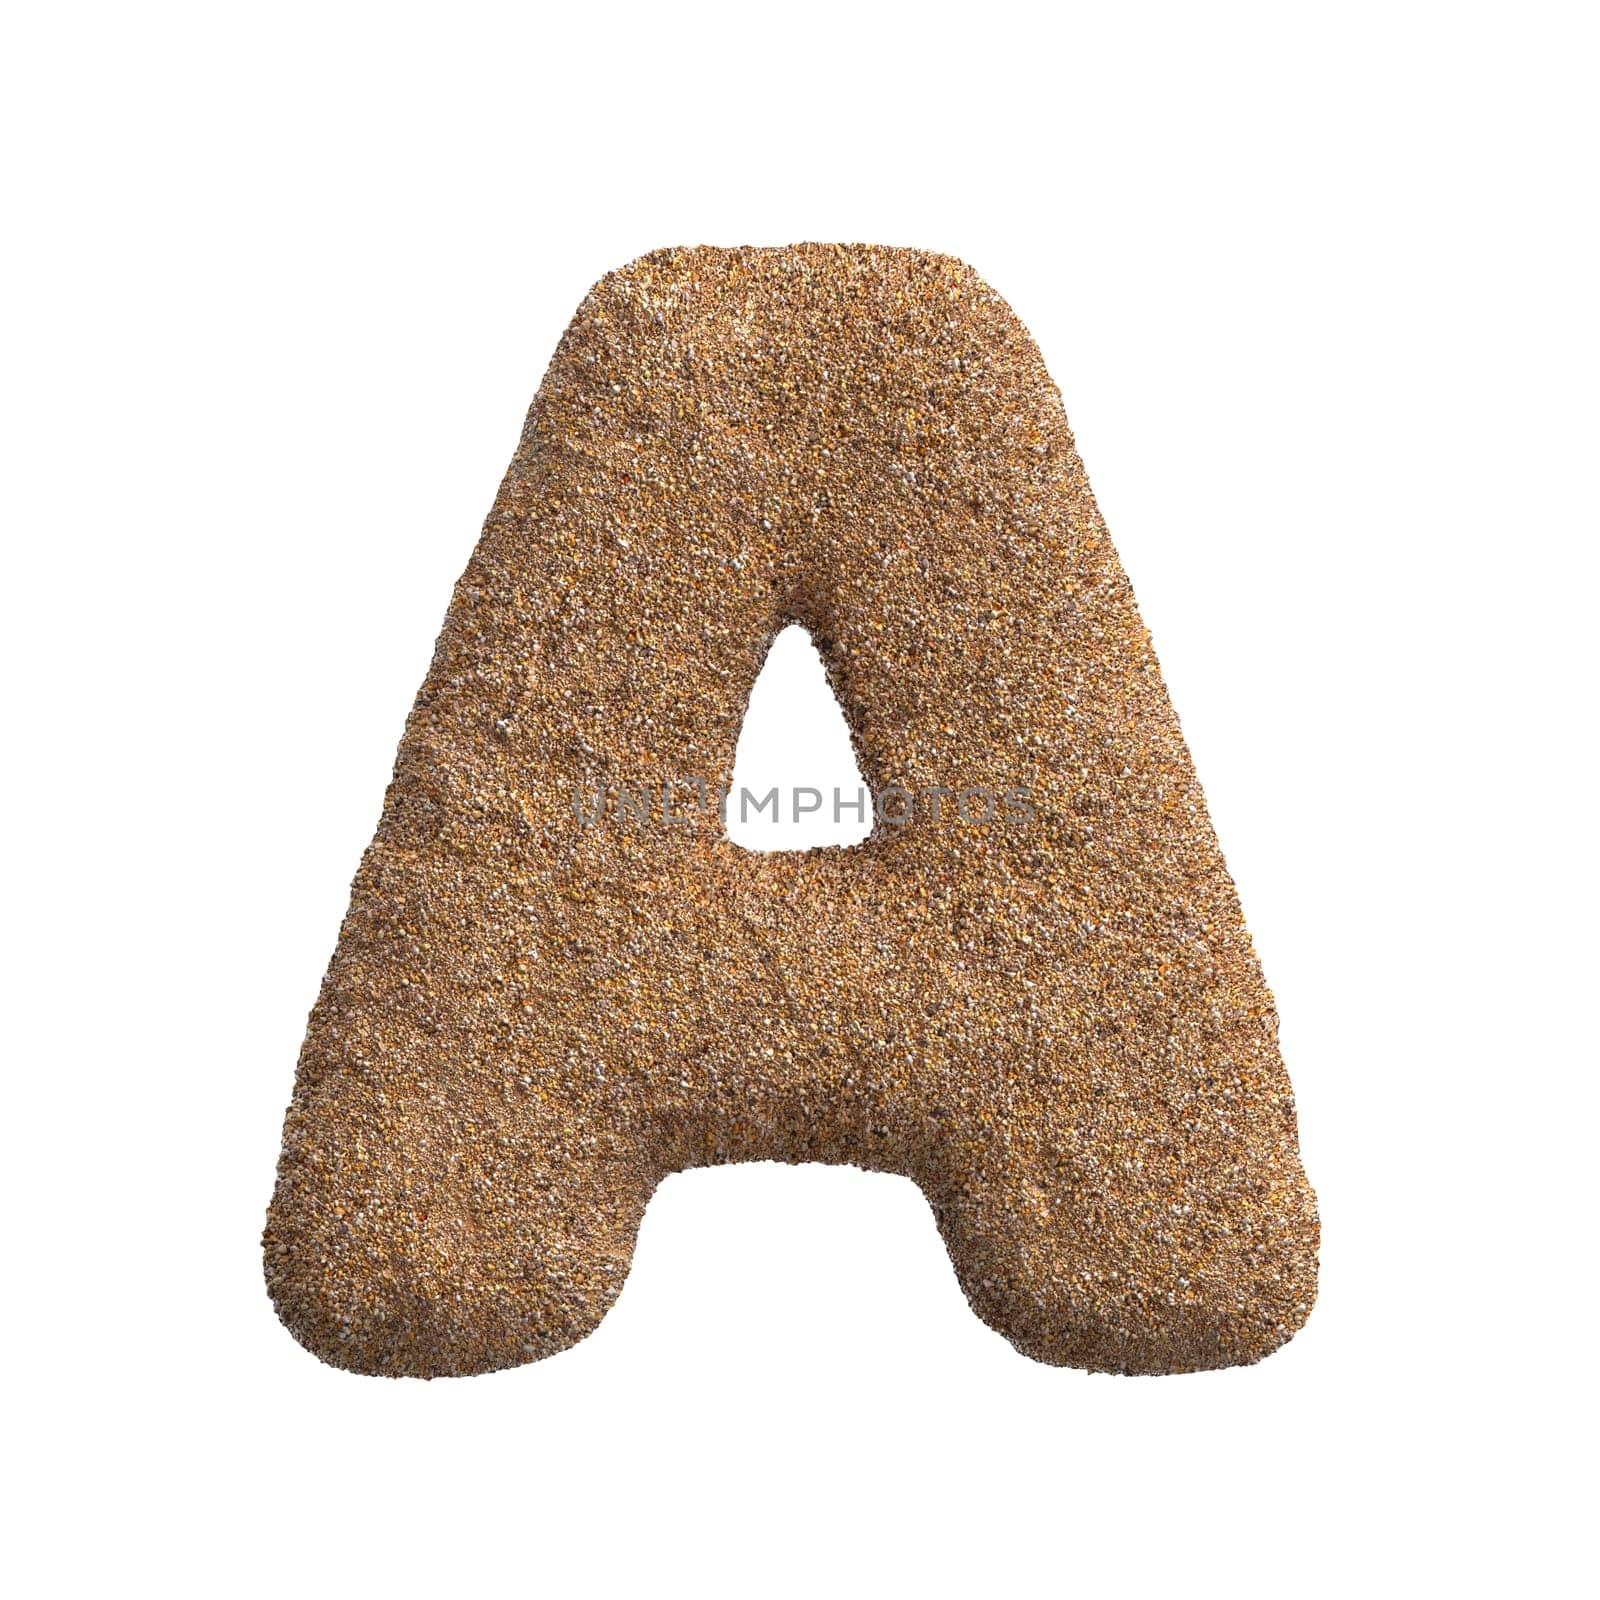 Sand letter A - Capital 3d beach font - Holidays, travel or ocean concepts by chrisroll